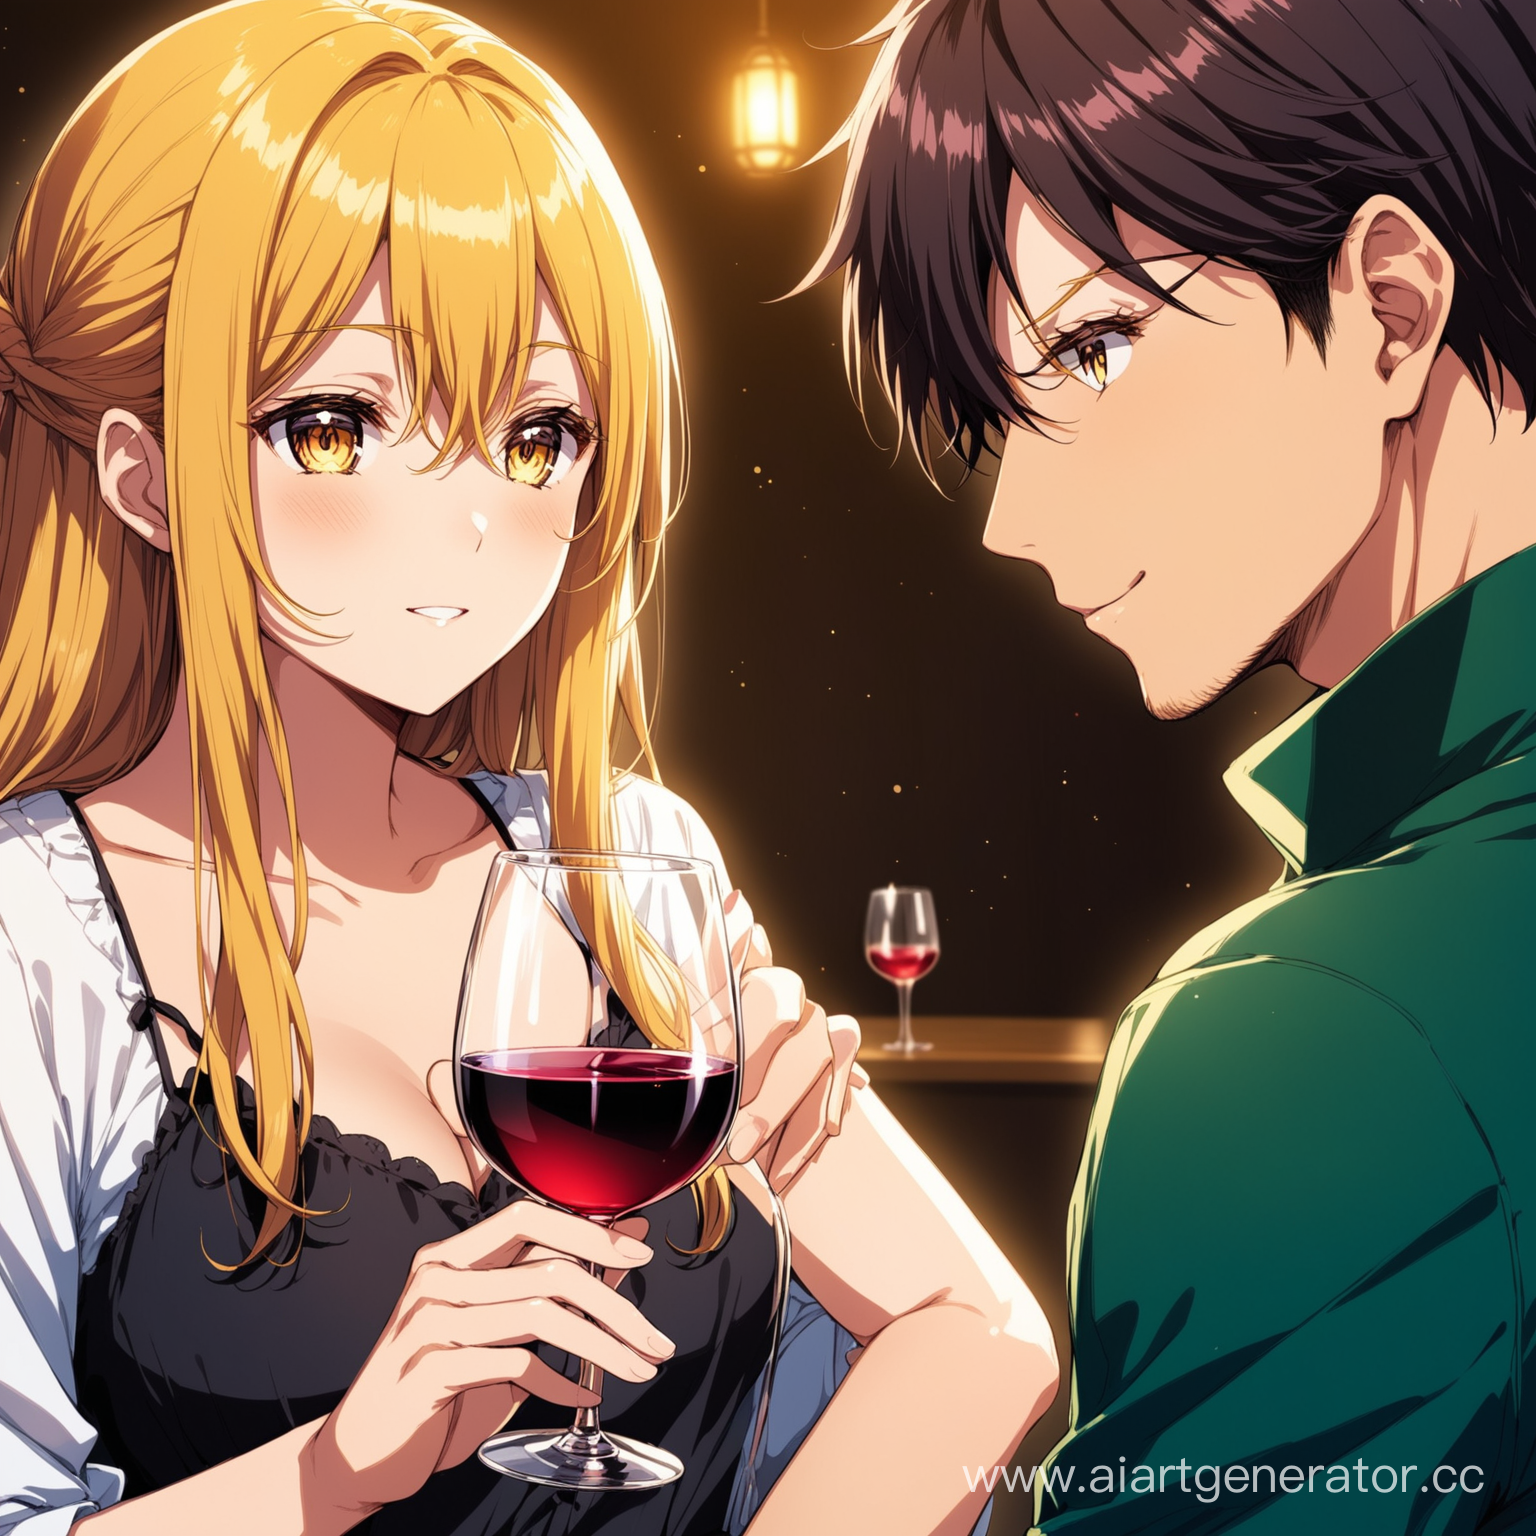 Anime guy looks at a girl who is holding a glass of wine